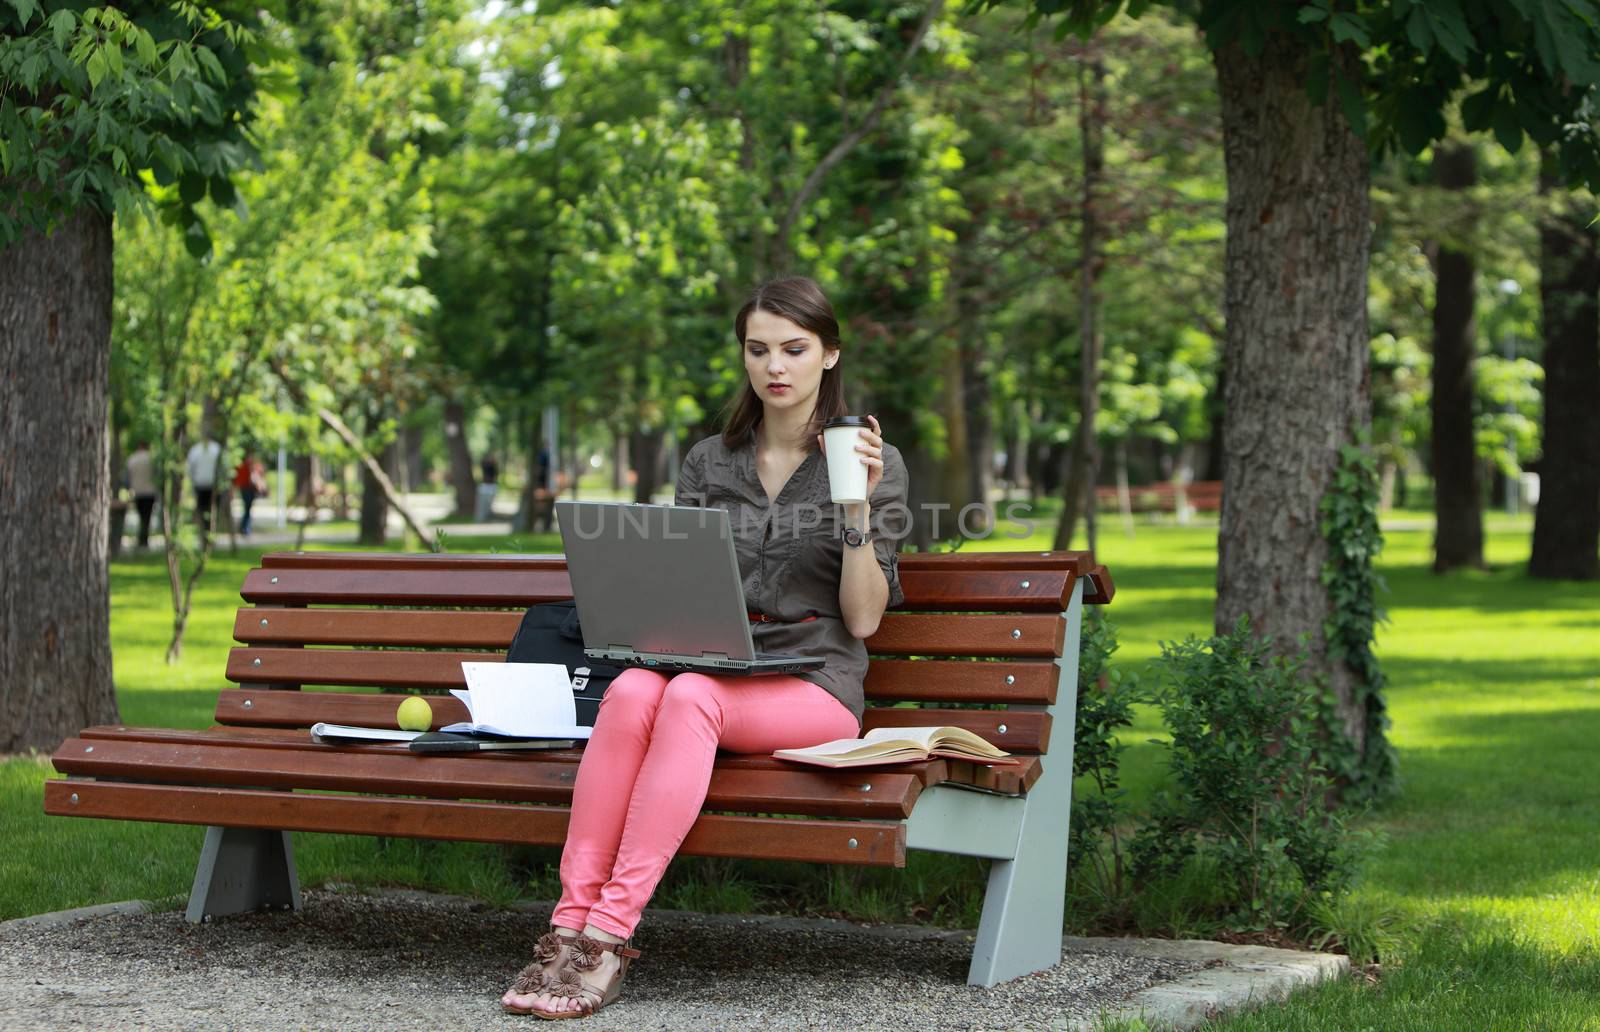 Young Woman Studying in a Park by RazvanPhotography